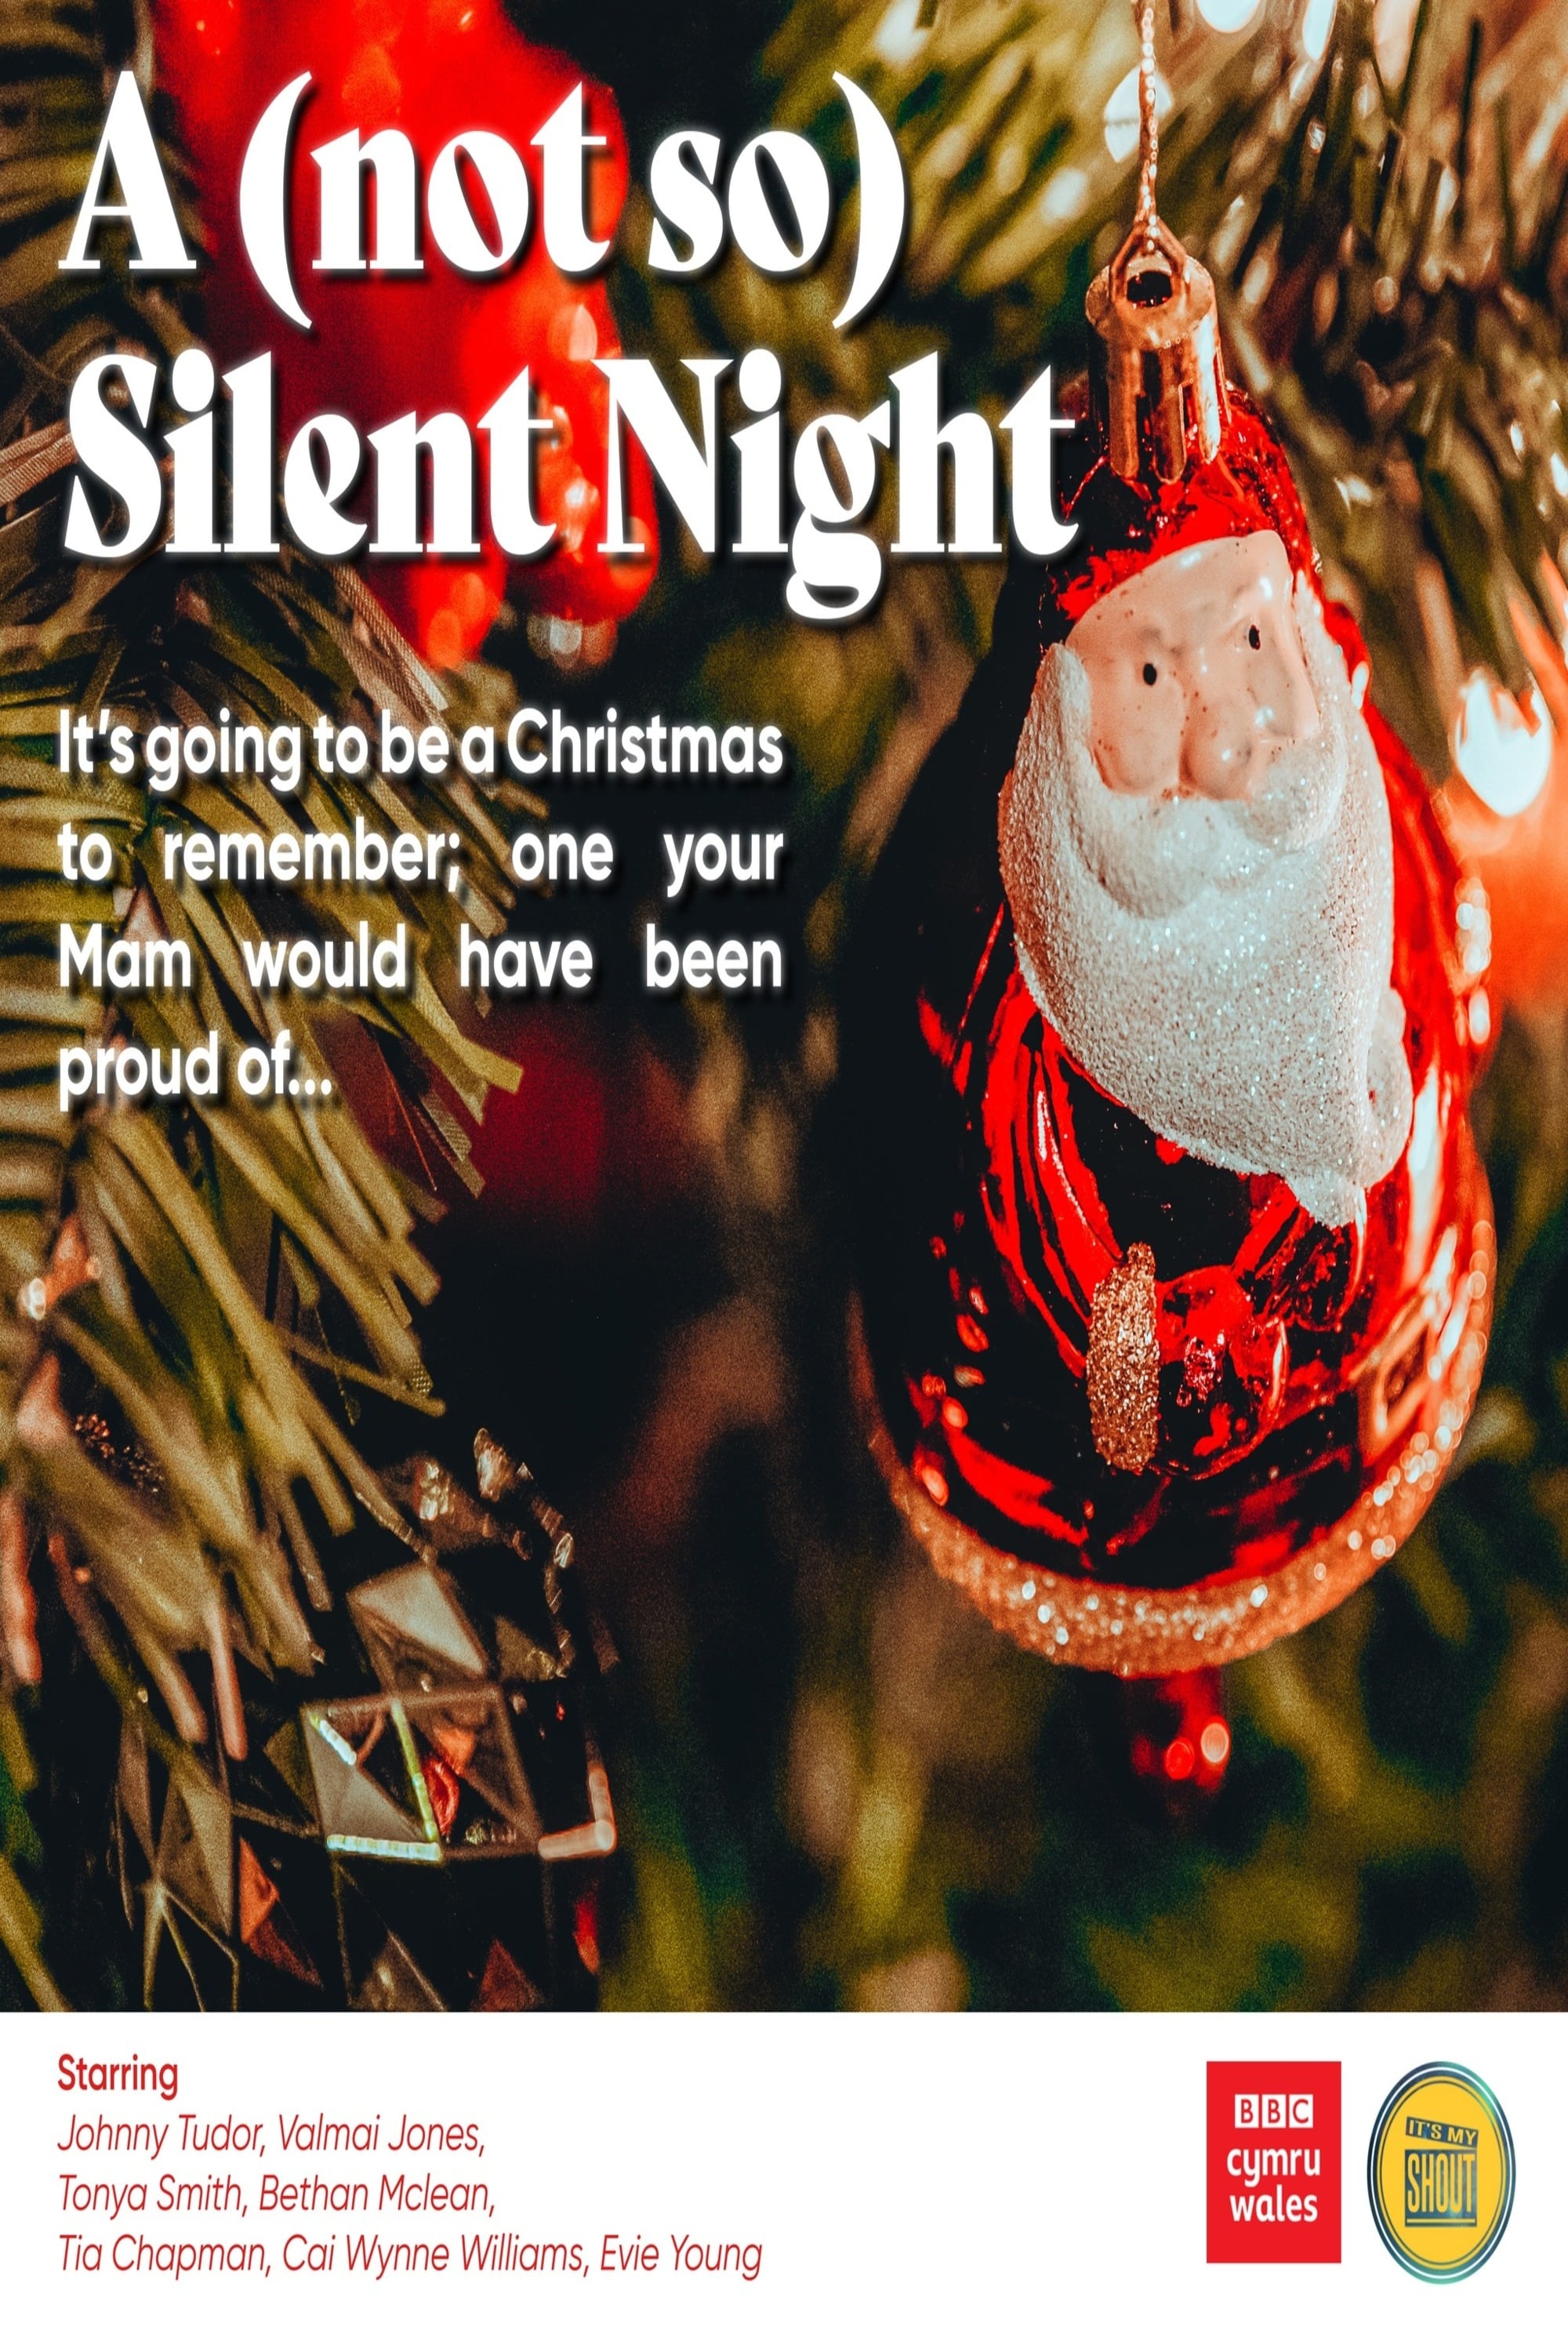 A (Not So) Silent Night